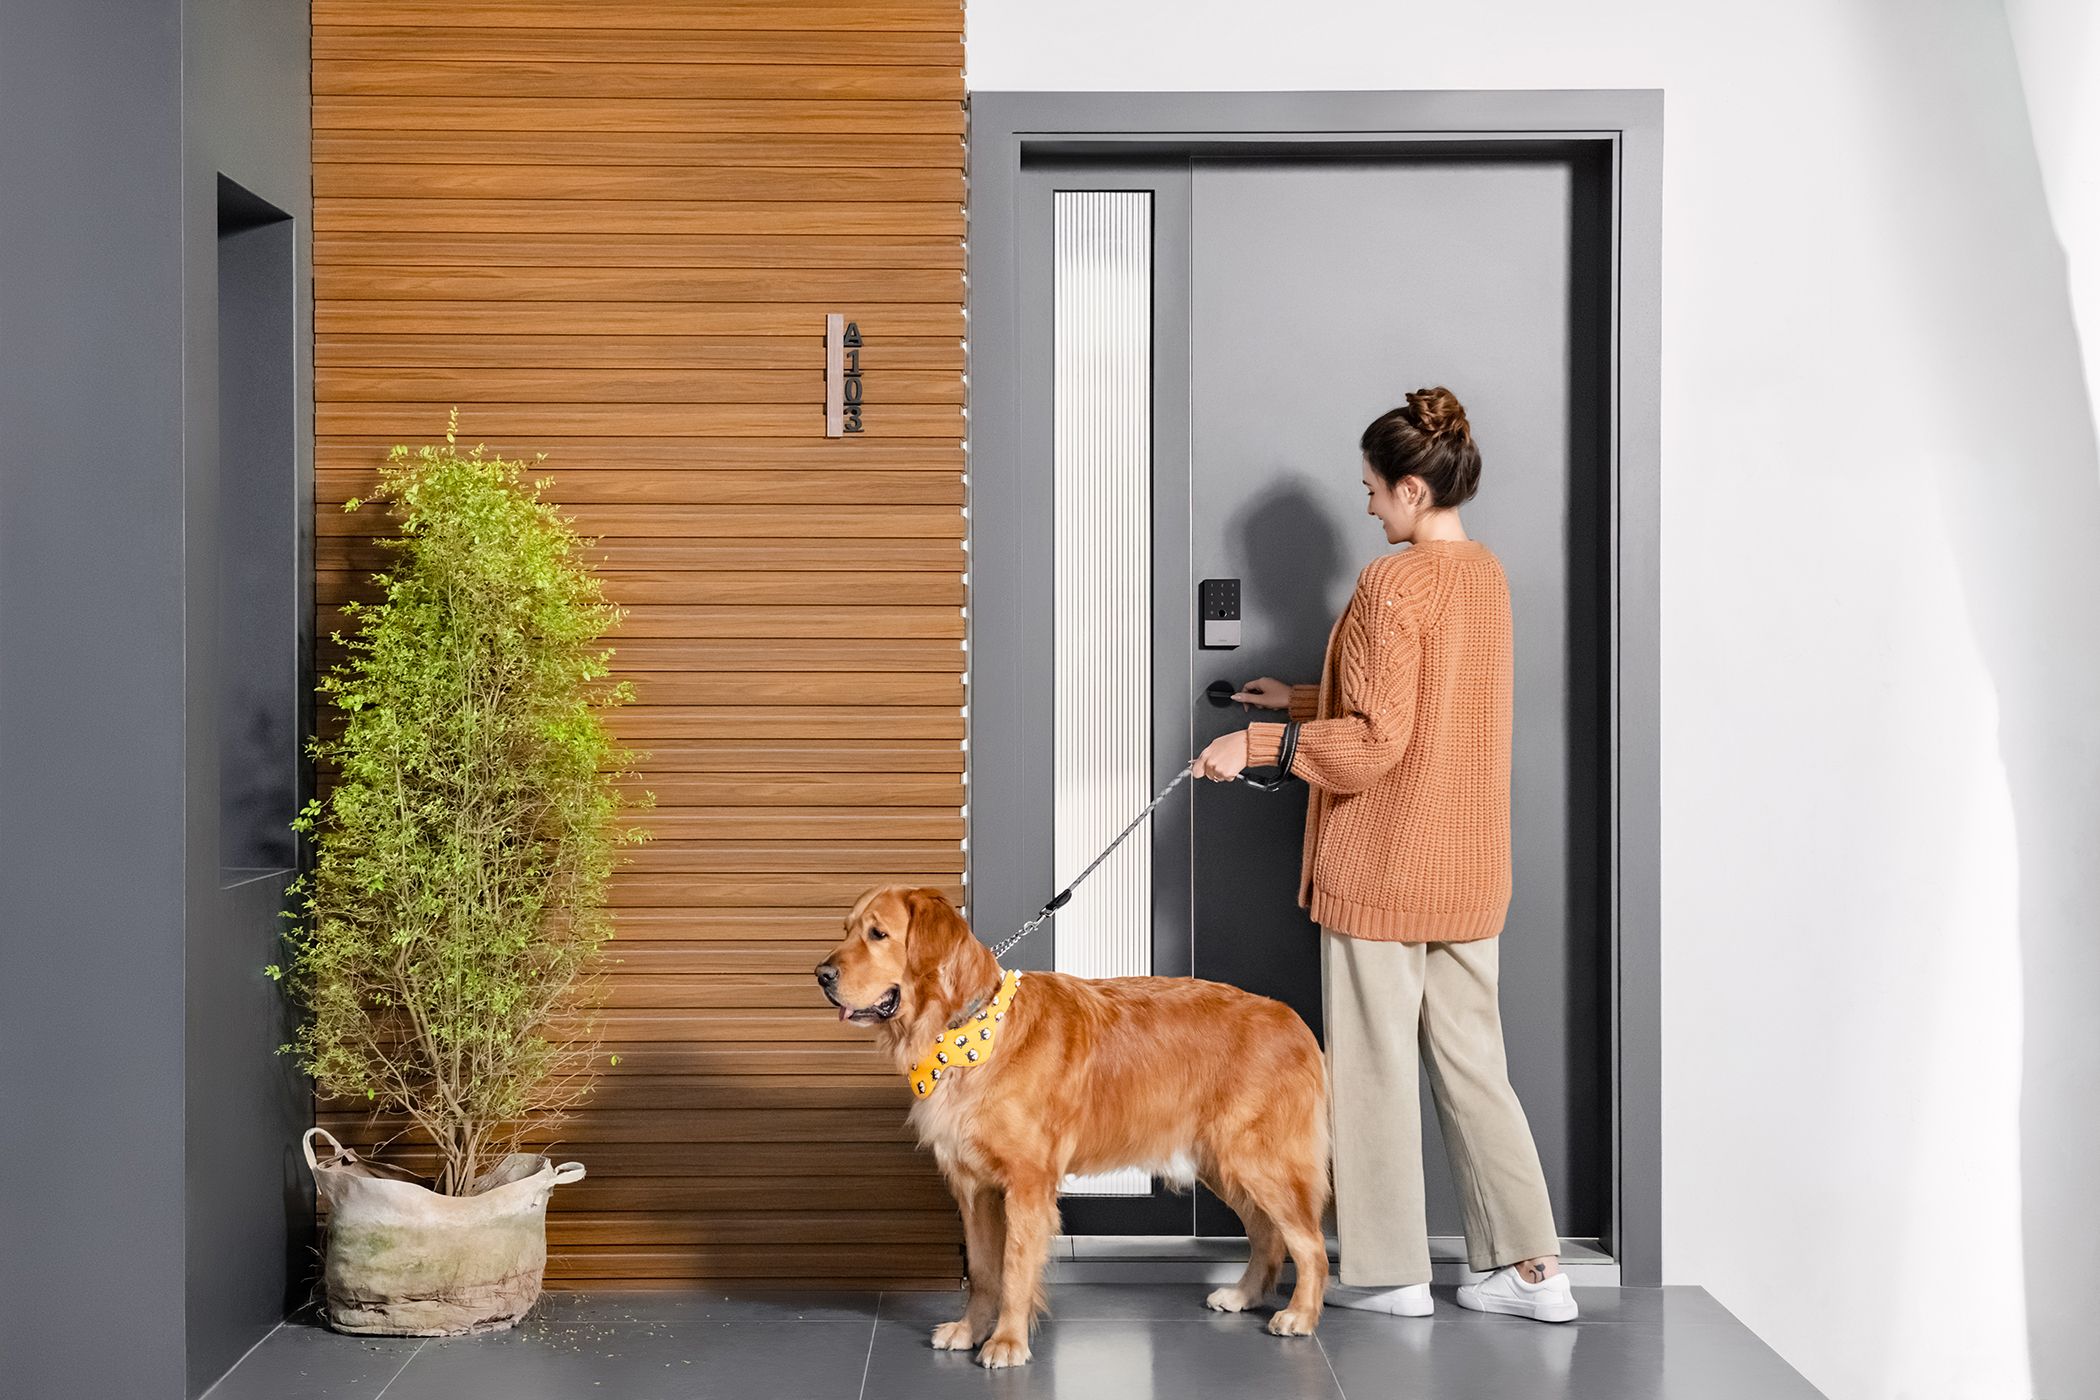 A woman opens her front door while holding her dog on a leash